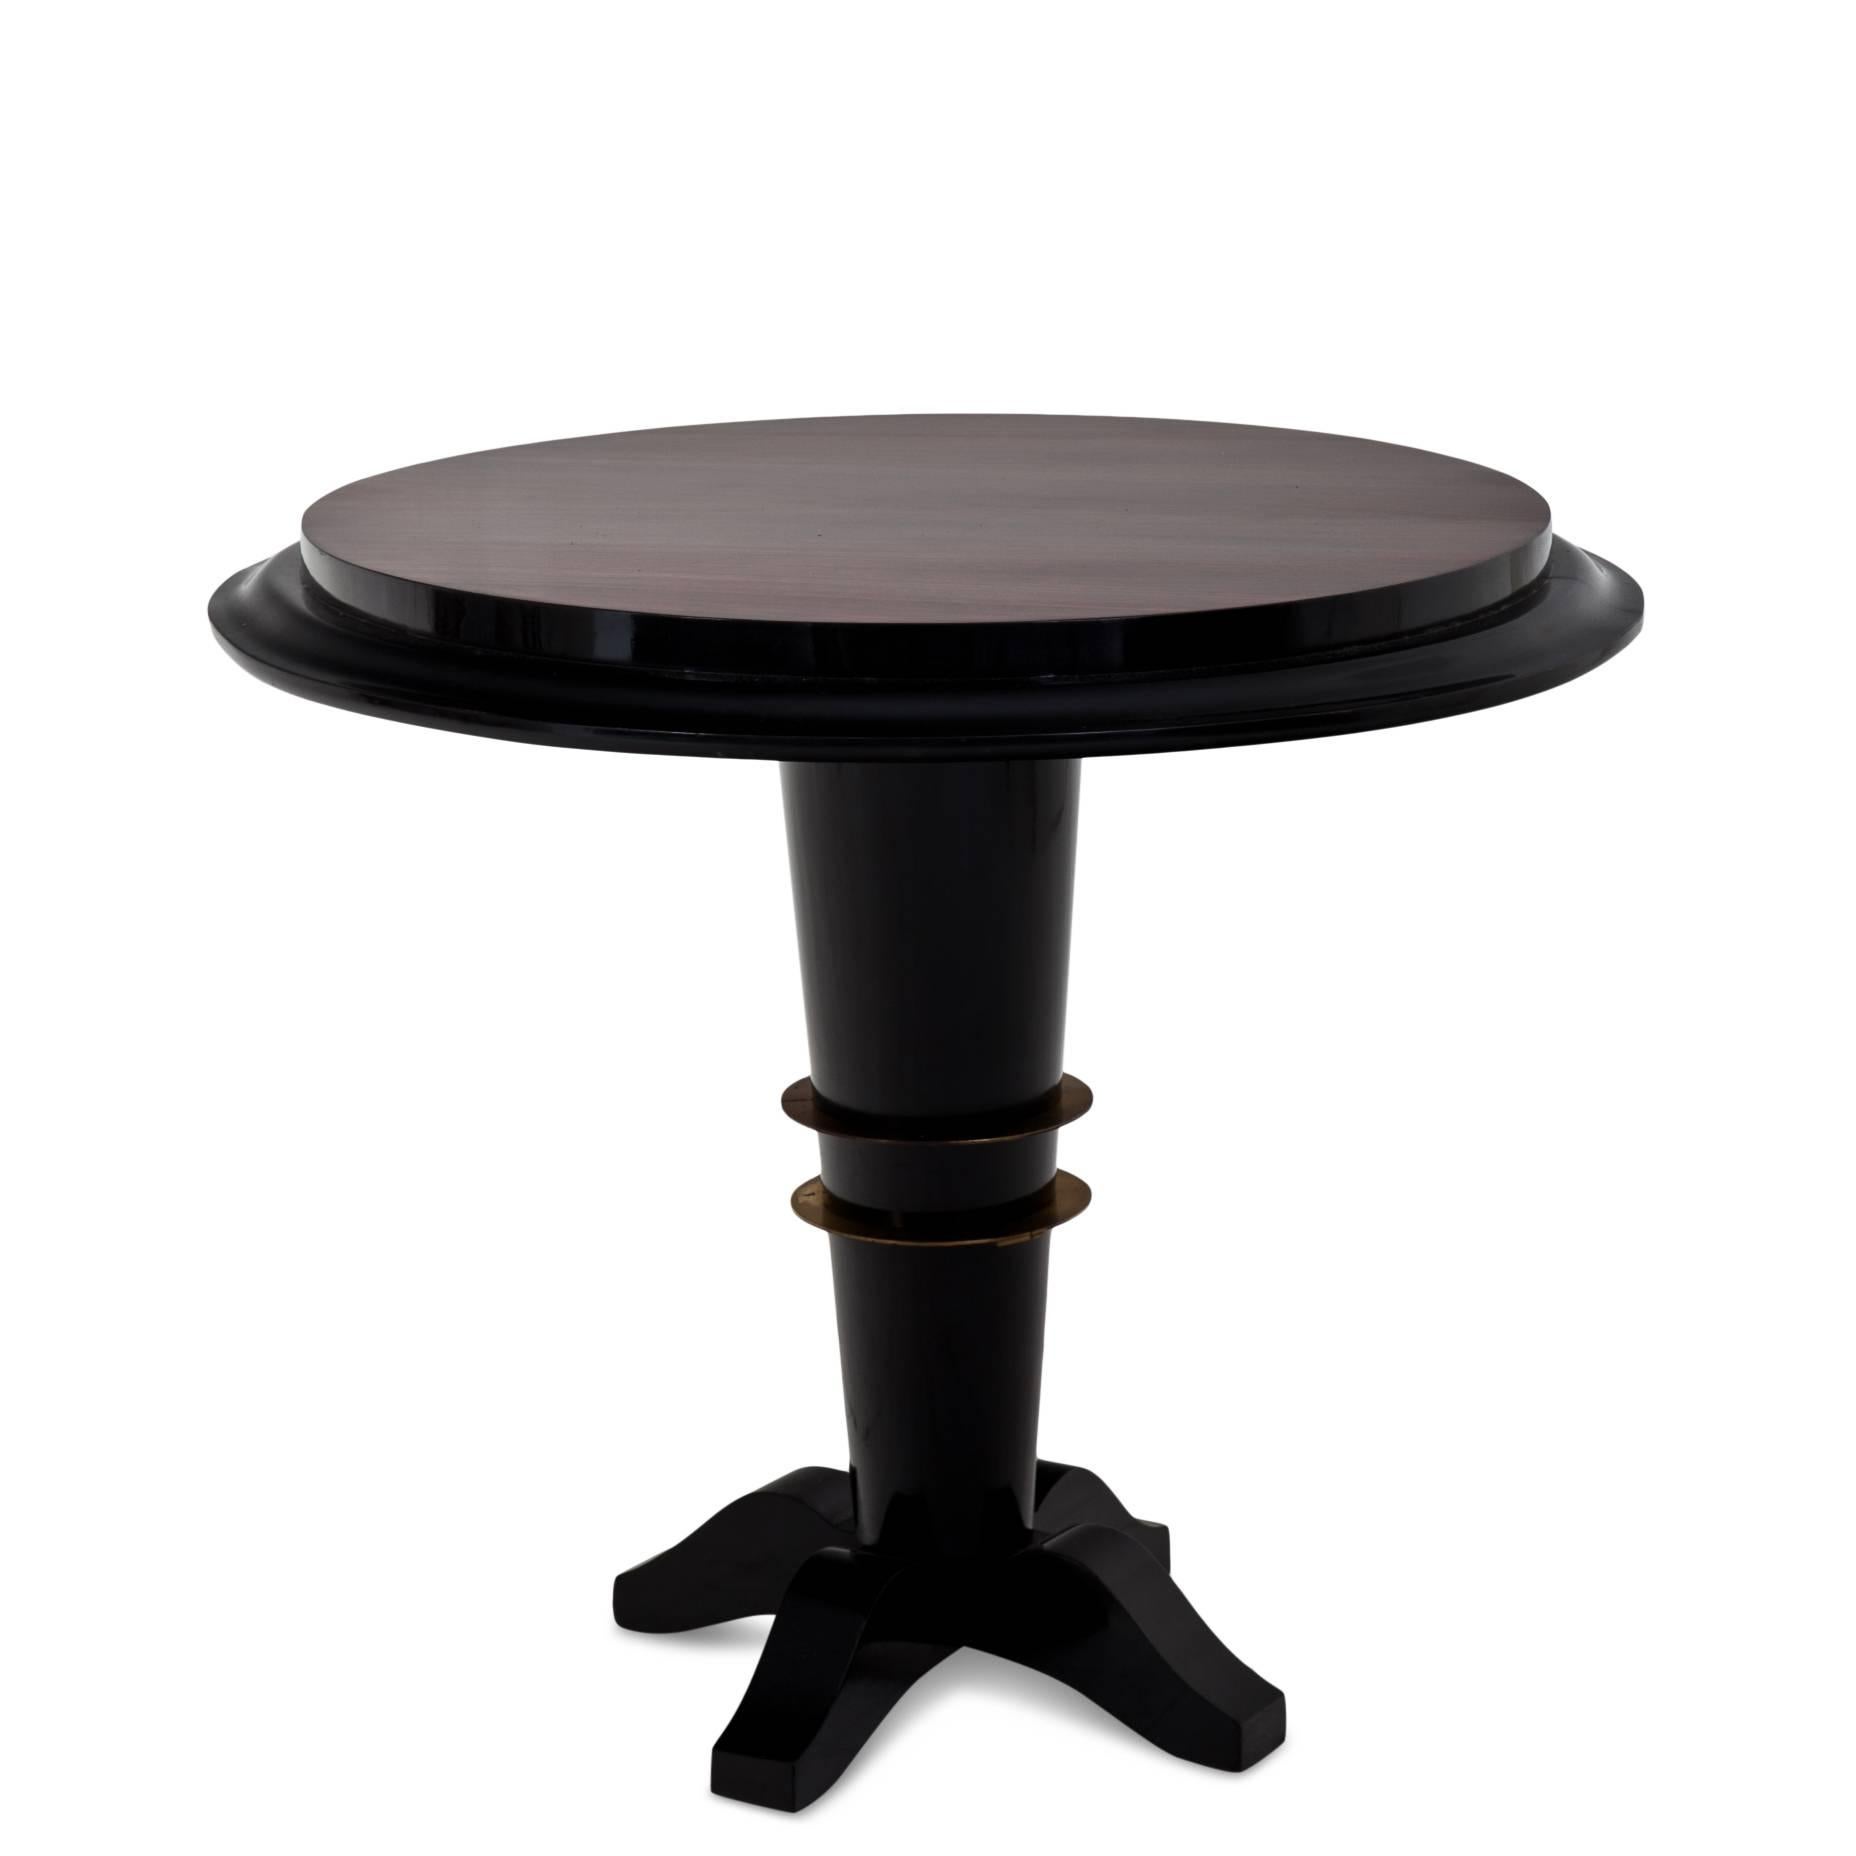 Ebonized Art Deco side table on a conical stand with four feet and a double brass ring around the middle. The tabletop shows a very beautiful mirrored veneer pattern.